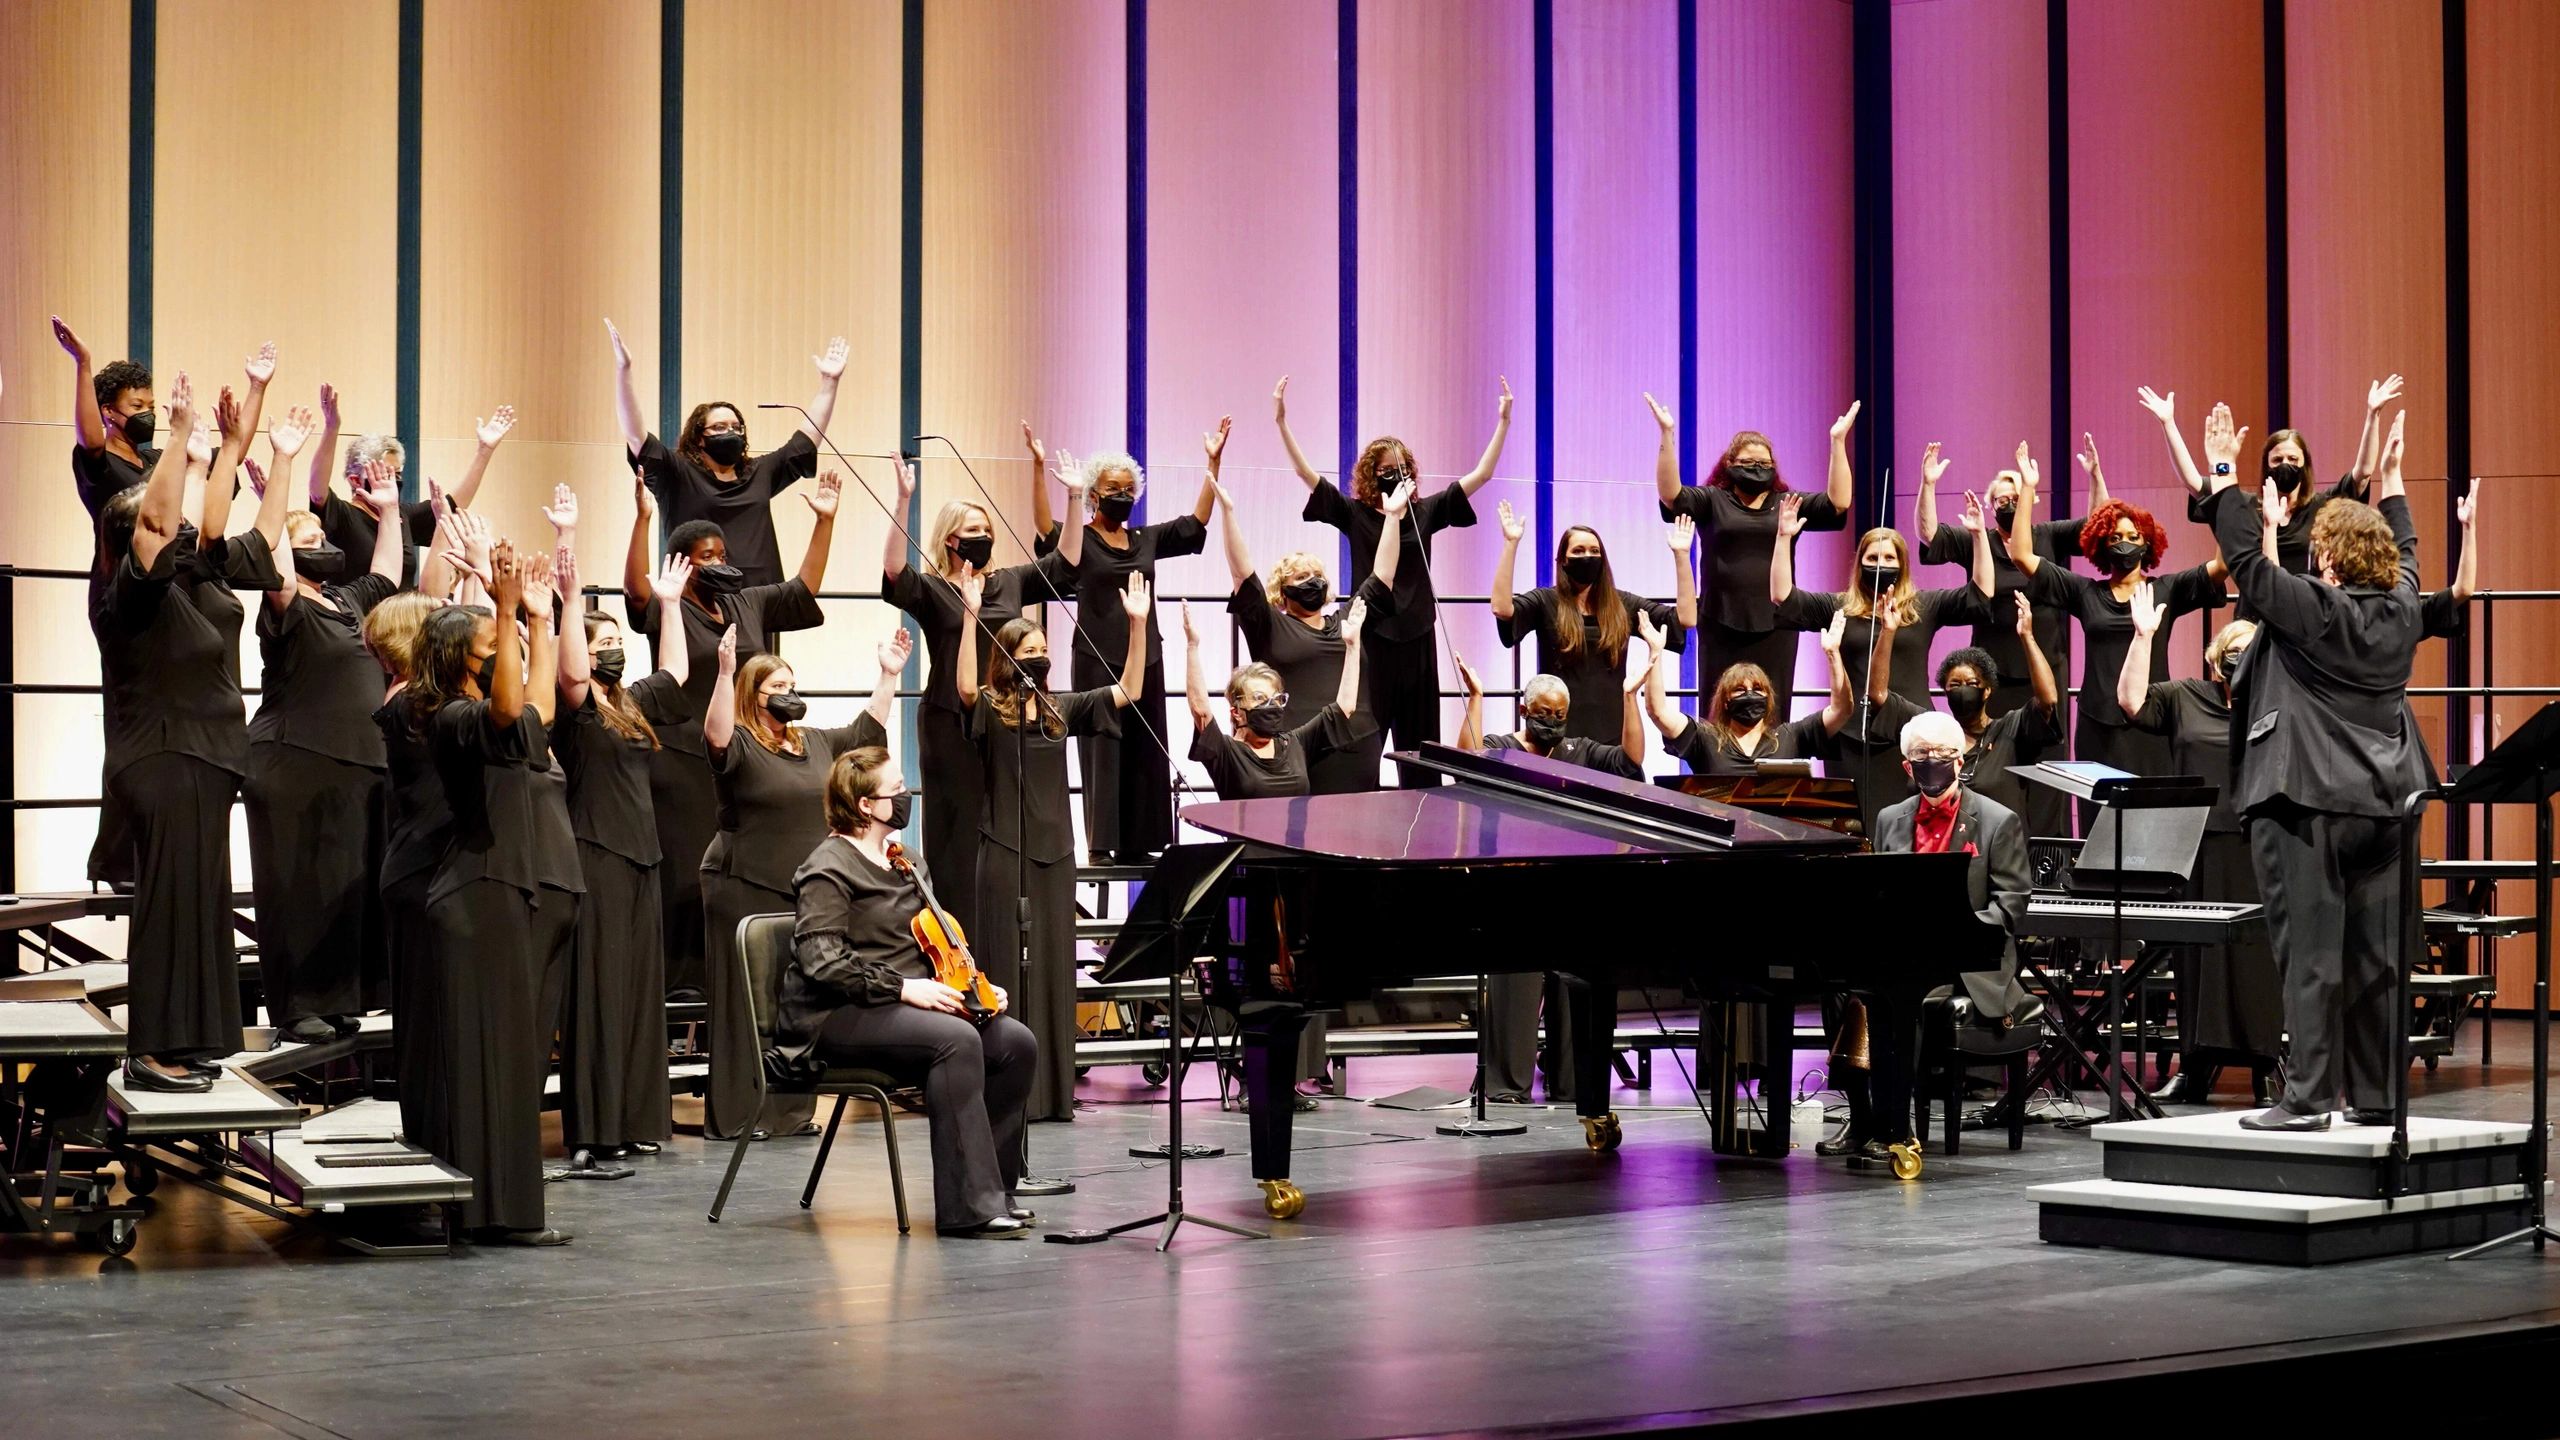 A choir of masked singers perform onstage with their arms lifted, facing a conductor doing the same,